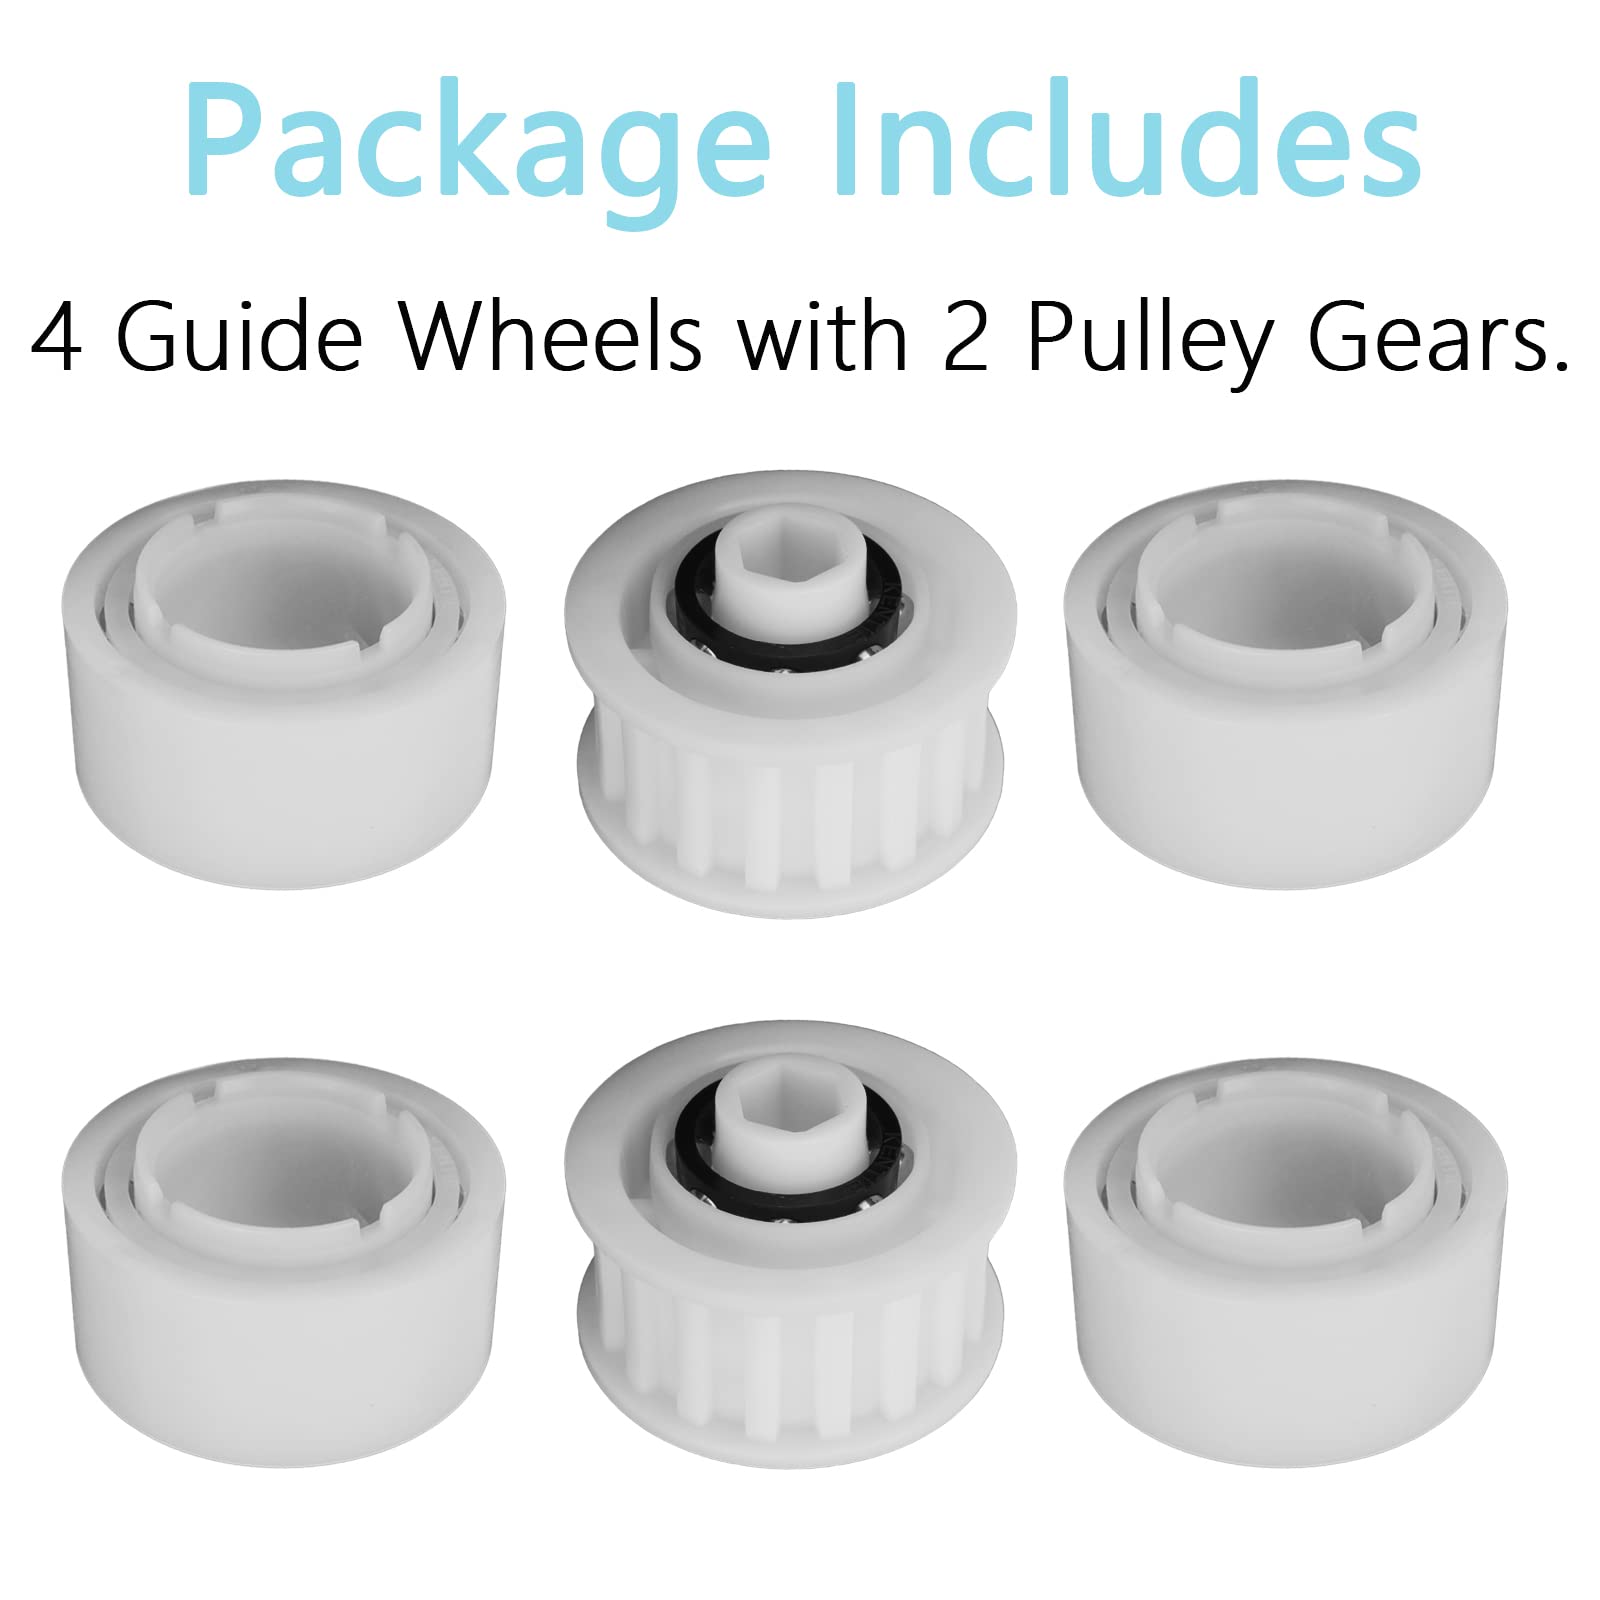 Aillsa 3884997-R6 Replacement Parts Pool Cleaner-Guide Wheels 4 Pack with 2 PackPully Gears Compatible with Maytronics Dolphin Nautilus, Nautilus CC Plus, M200, M400, M500, Premier Pool Cleaner